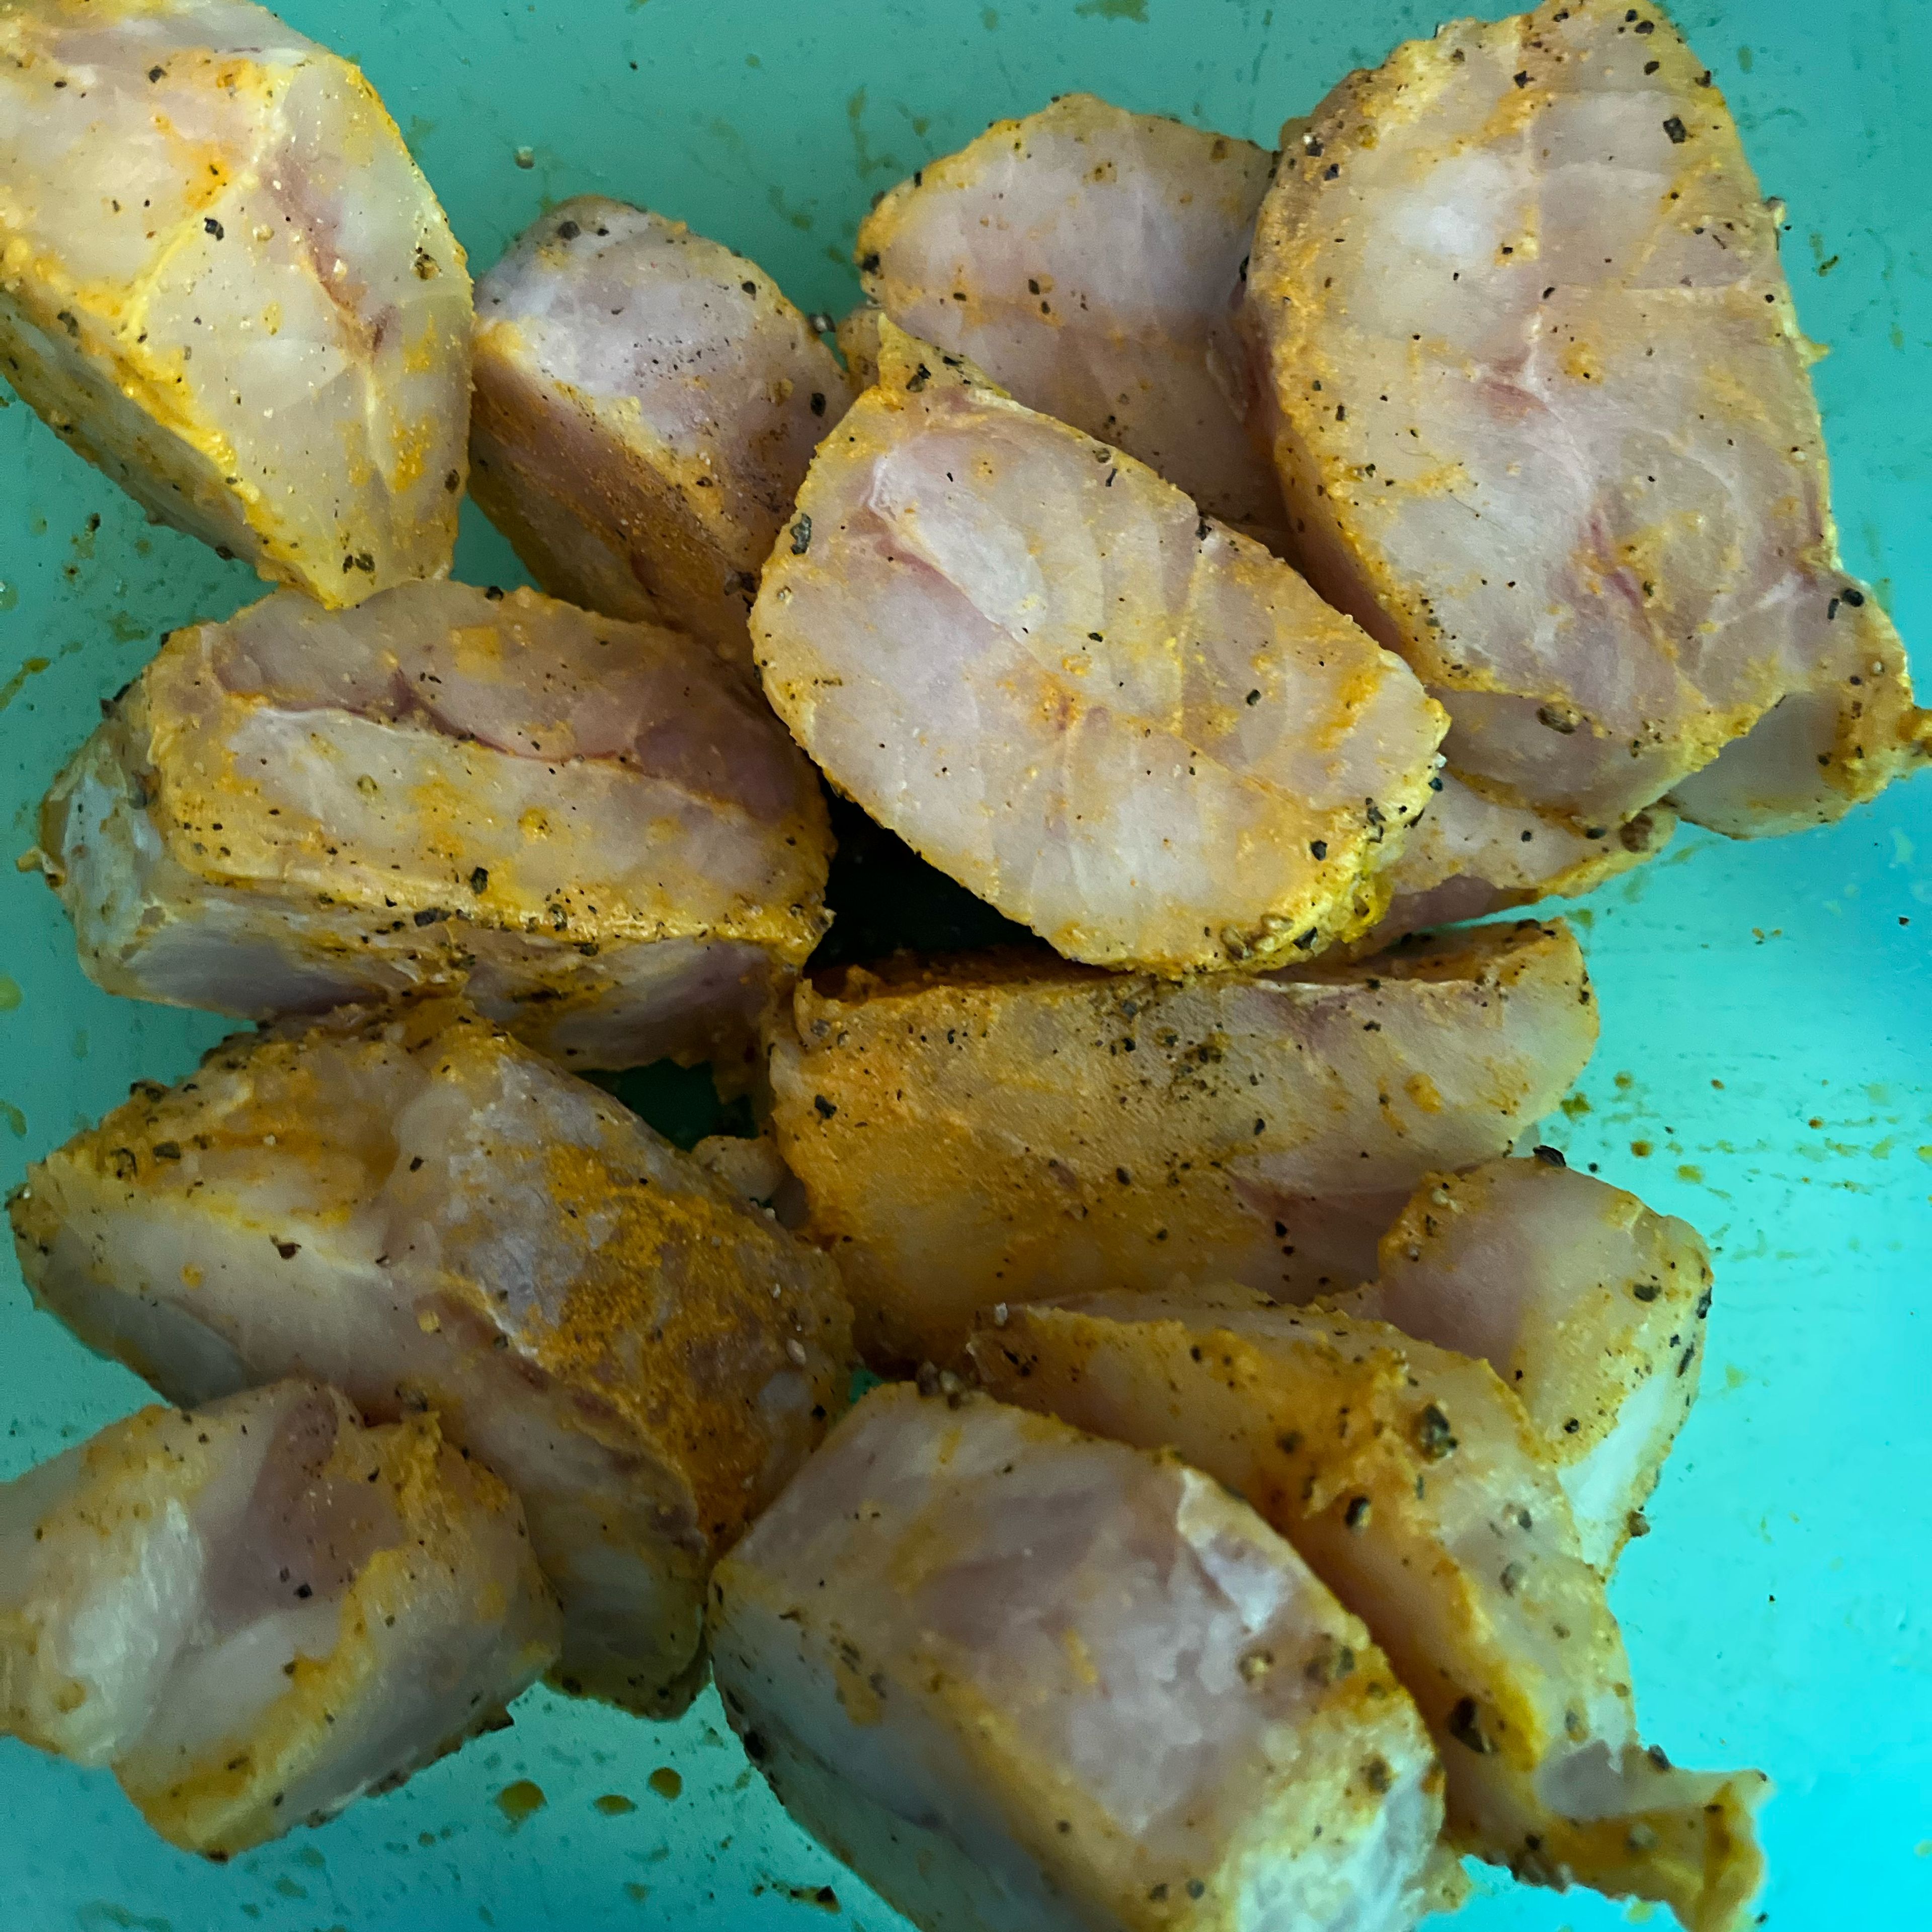 Cut fish into large cubes and marinade with salt, pepper, turmeric and lemon juice while you prepare the remaining ingredients.